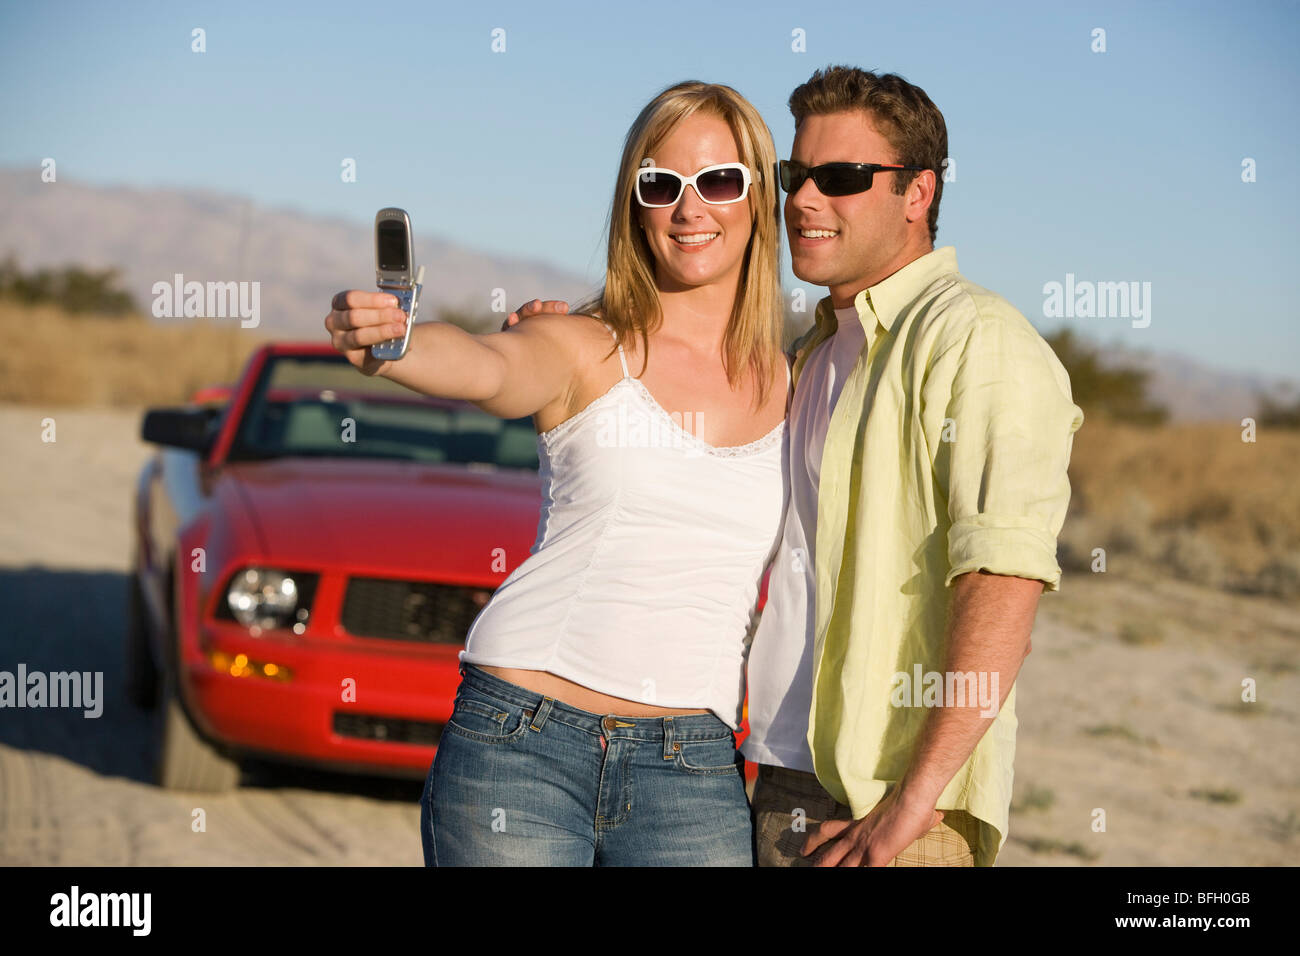 Couple Taking a Camera Phone Picture Stock Photo